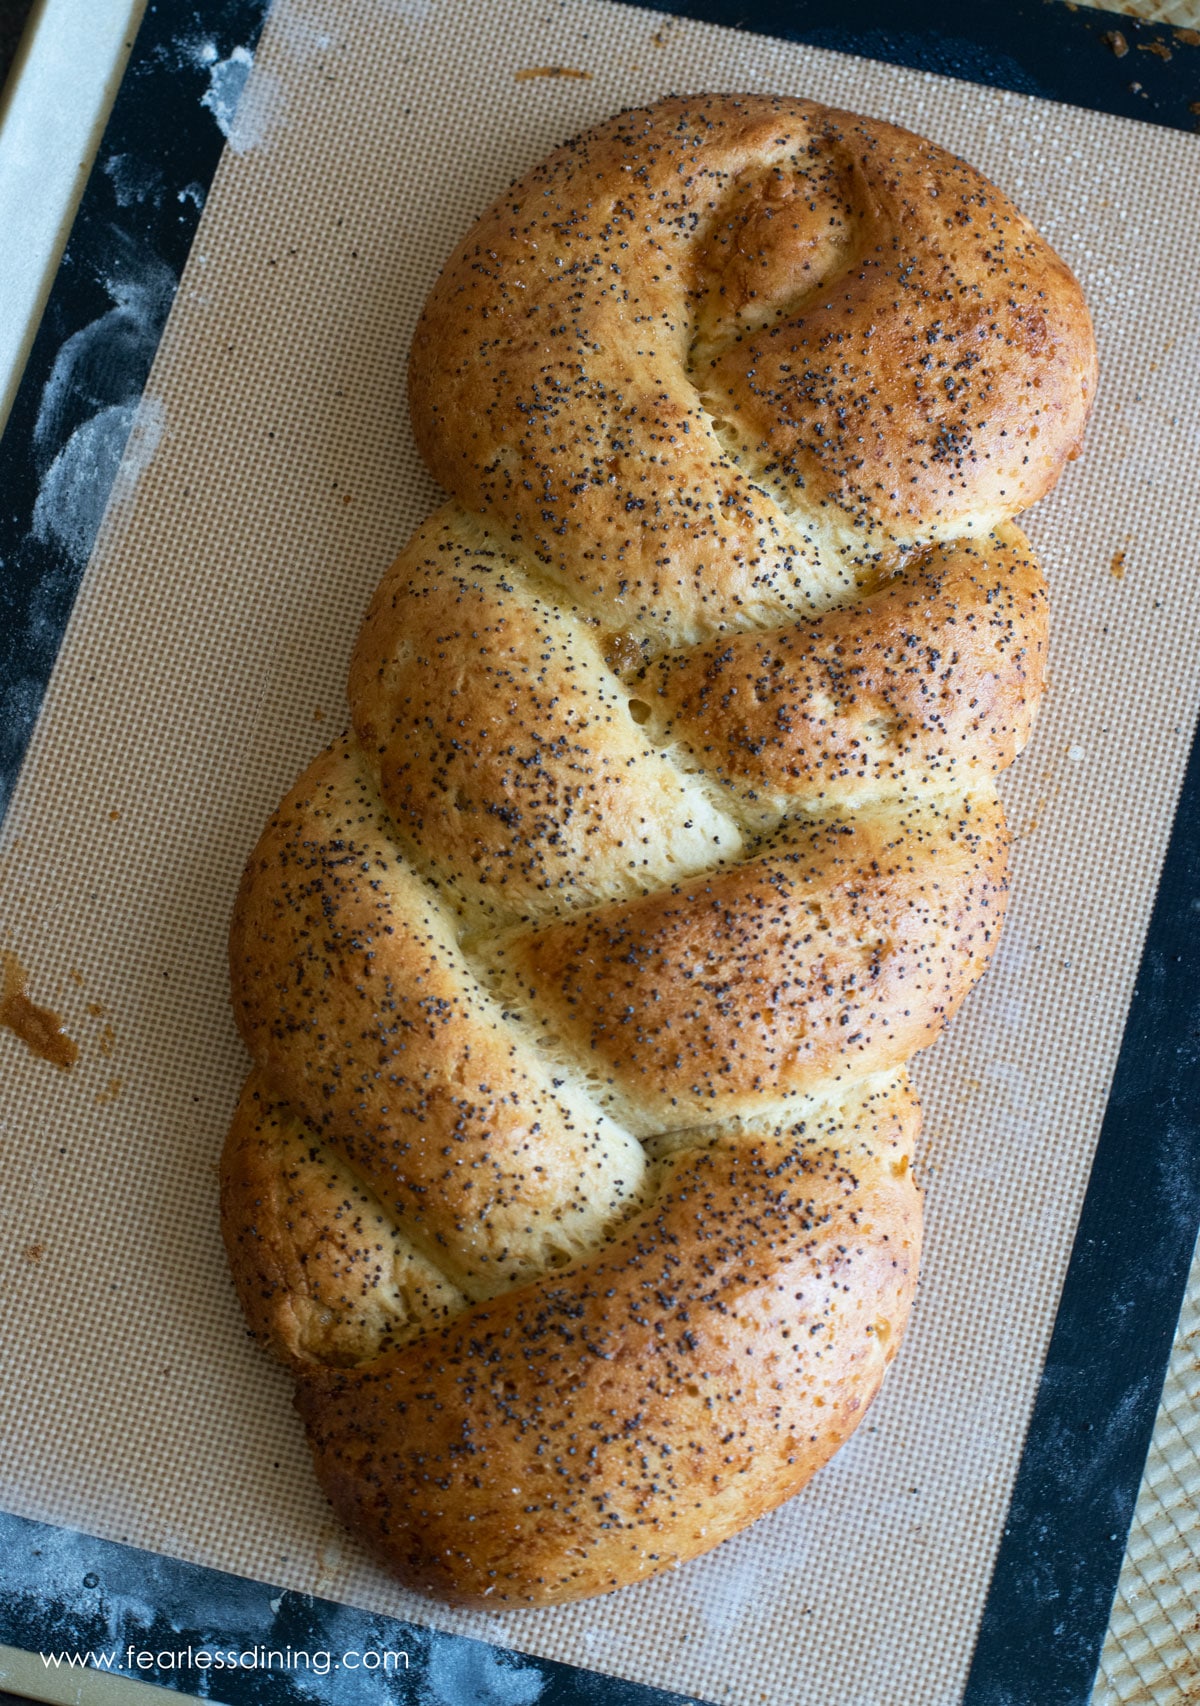 a whole gluten free challah that came out of the oven